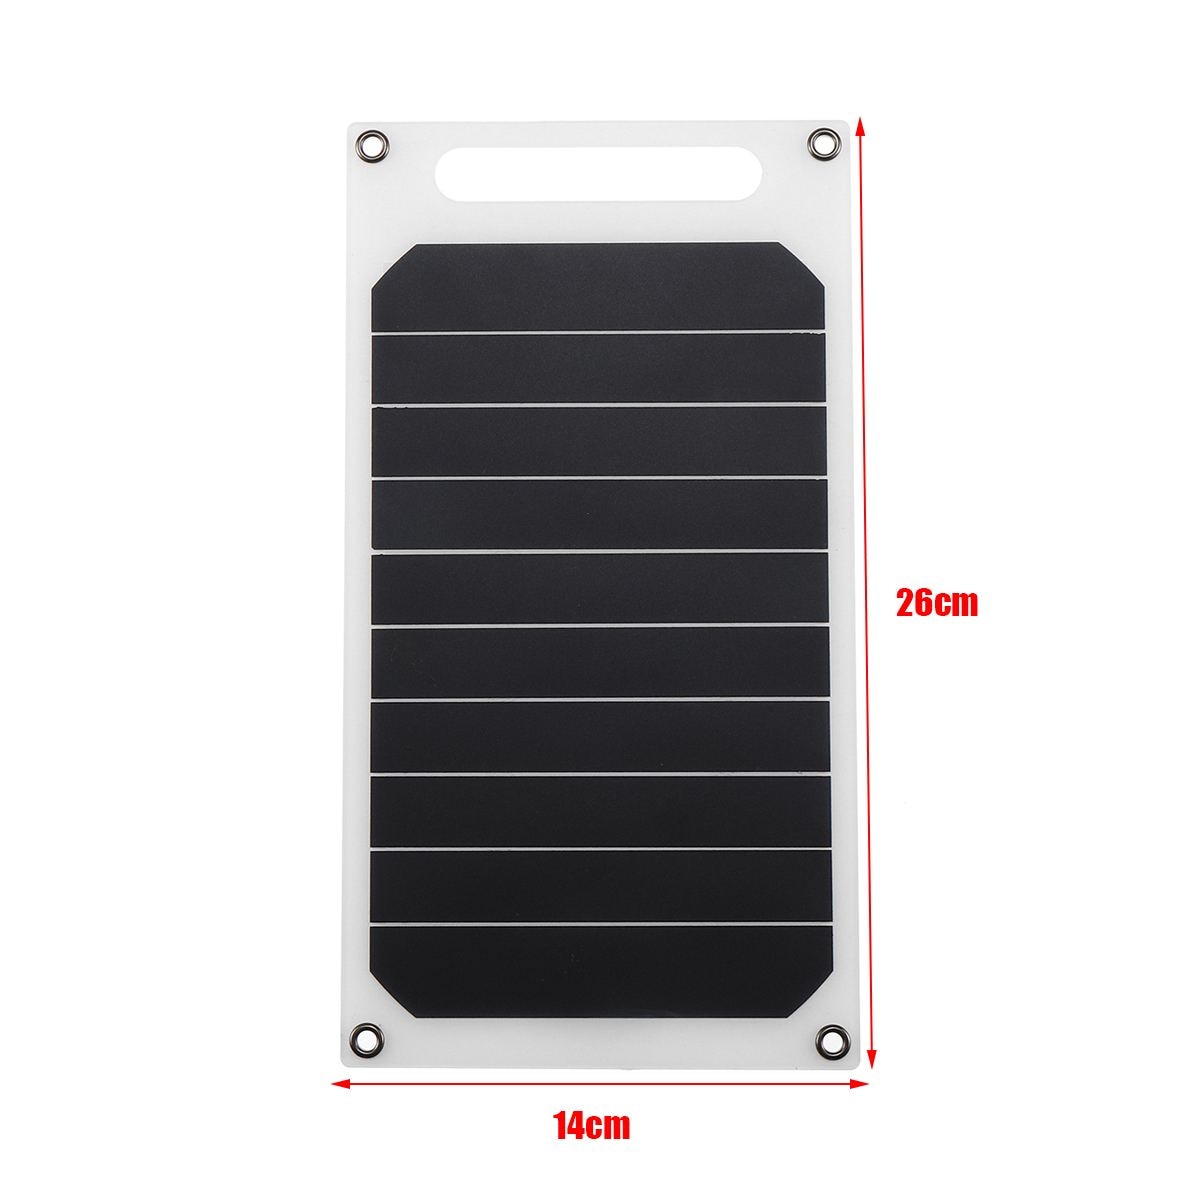 Solar Panel Charger Charging Device